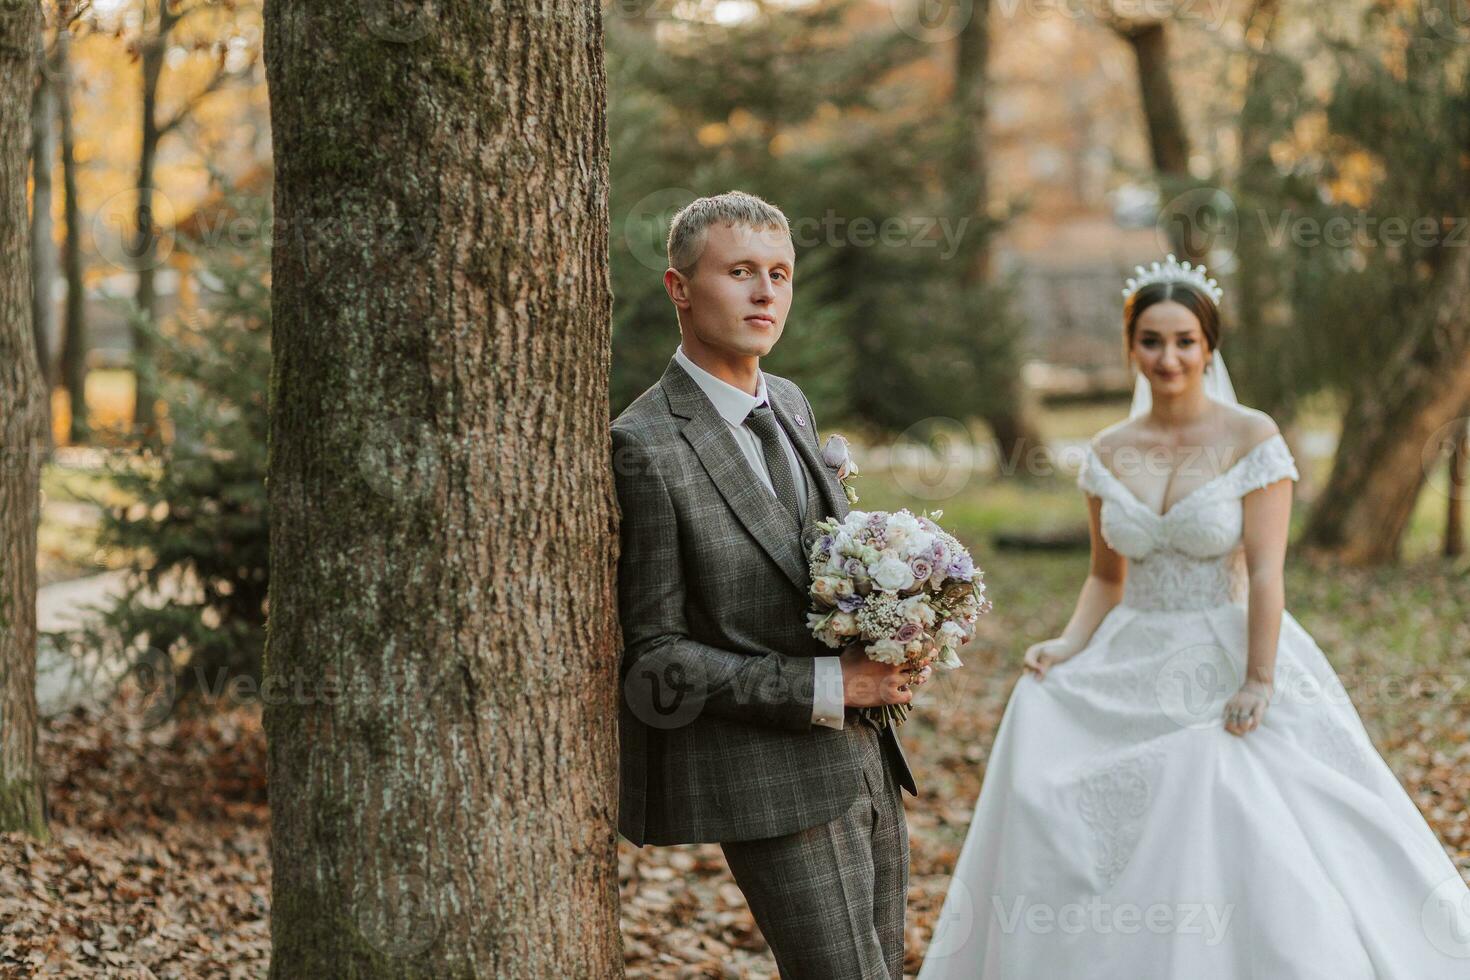 Portrait of the bride and groom in nature, a beautiful couple in love. Autumn tree leaves. The newlyweds are walking in the autumn park photo